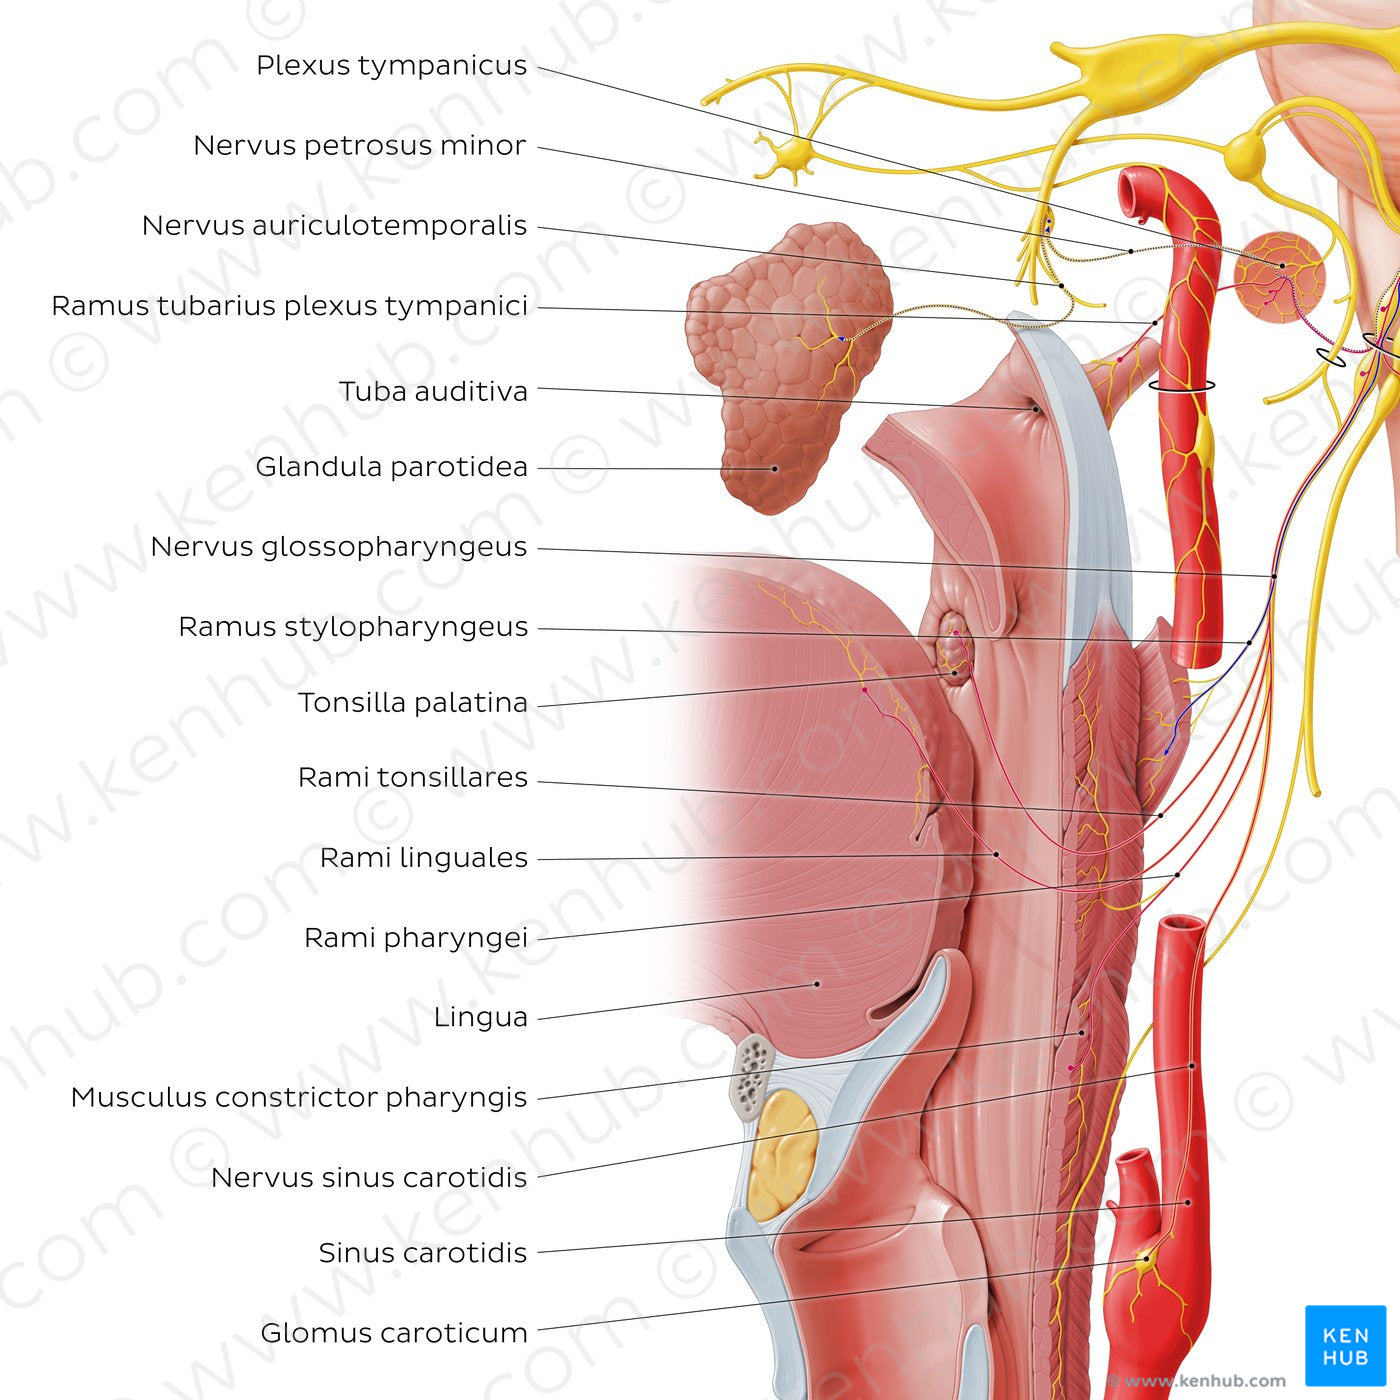 Glossopharyngeal nerve (distal branches) (Latin)